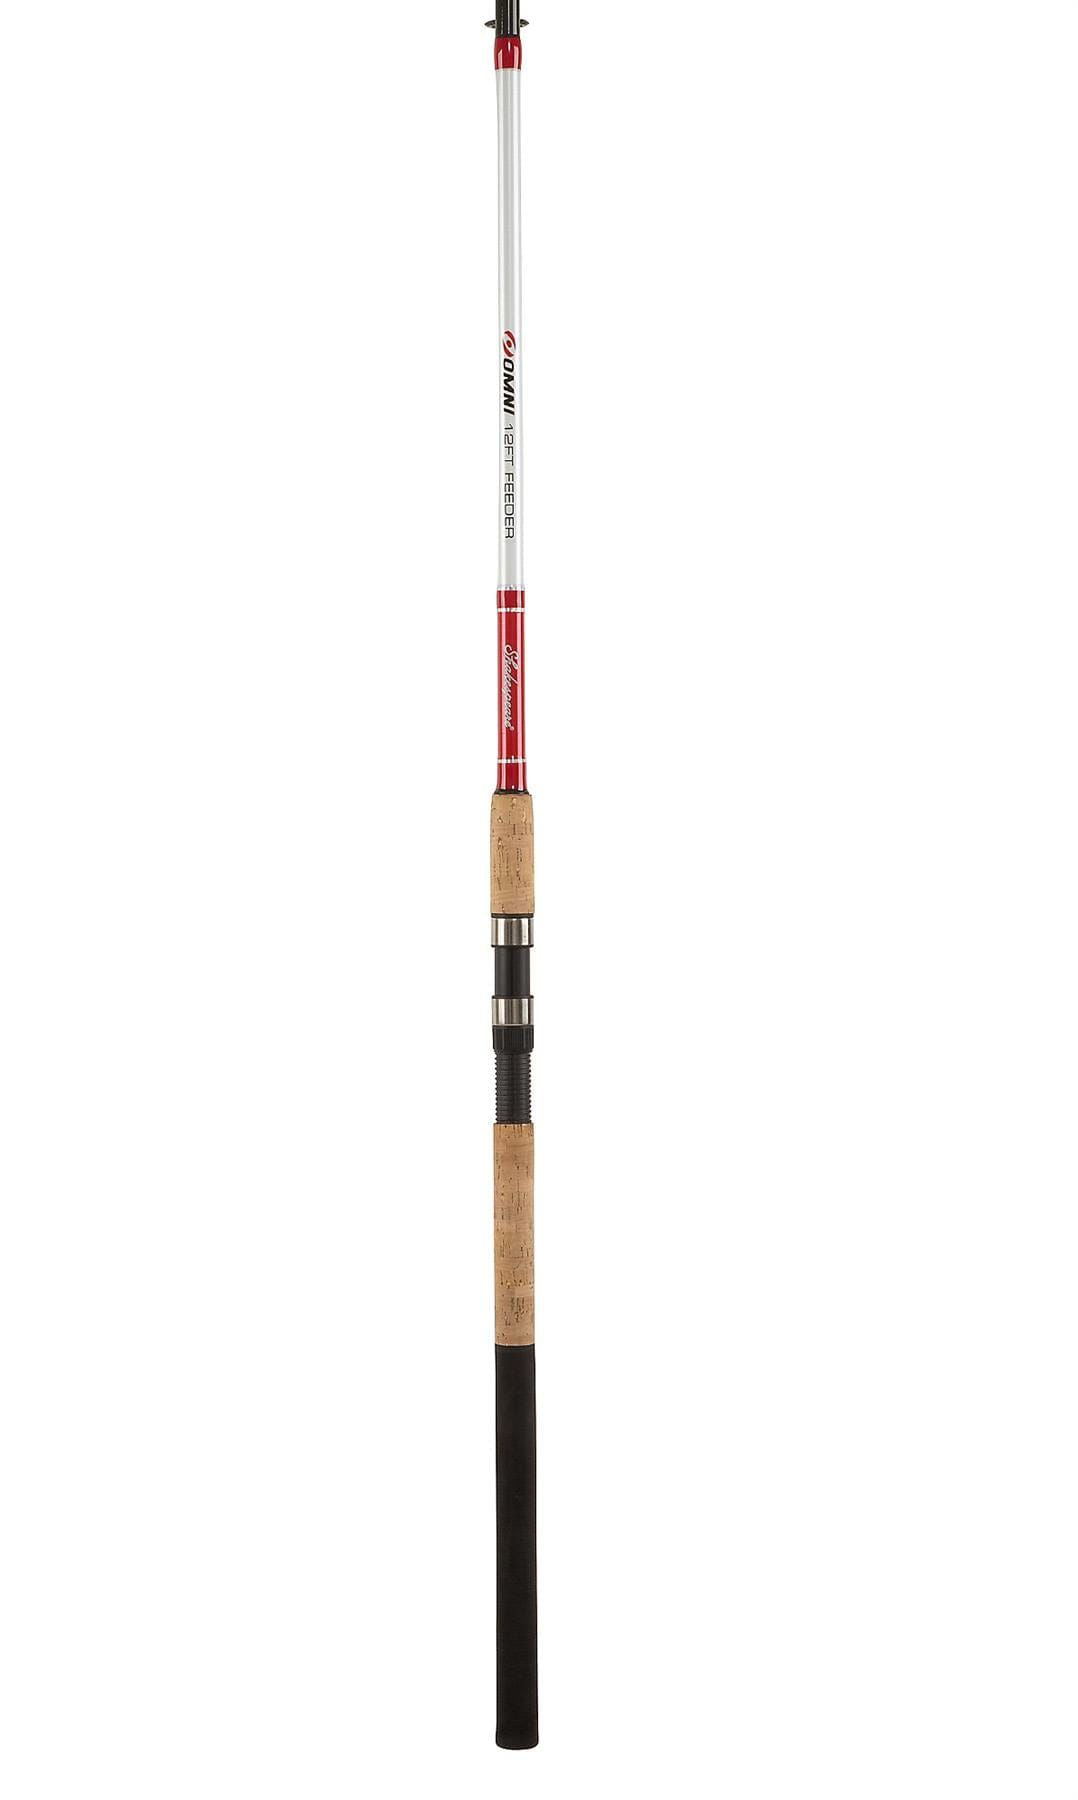 Shakespeare OMNI Carbon Feeder Rod incl 2 tips and transport bag - Rods and  Lines